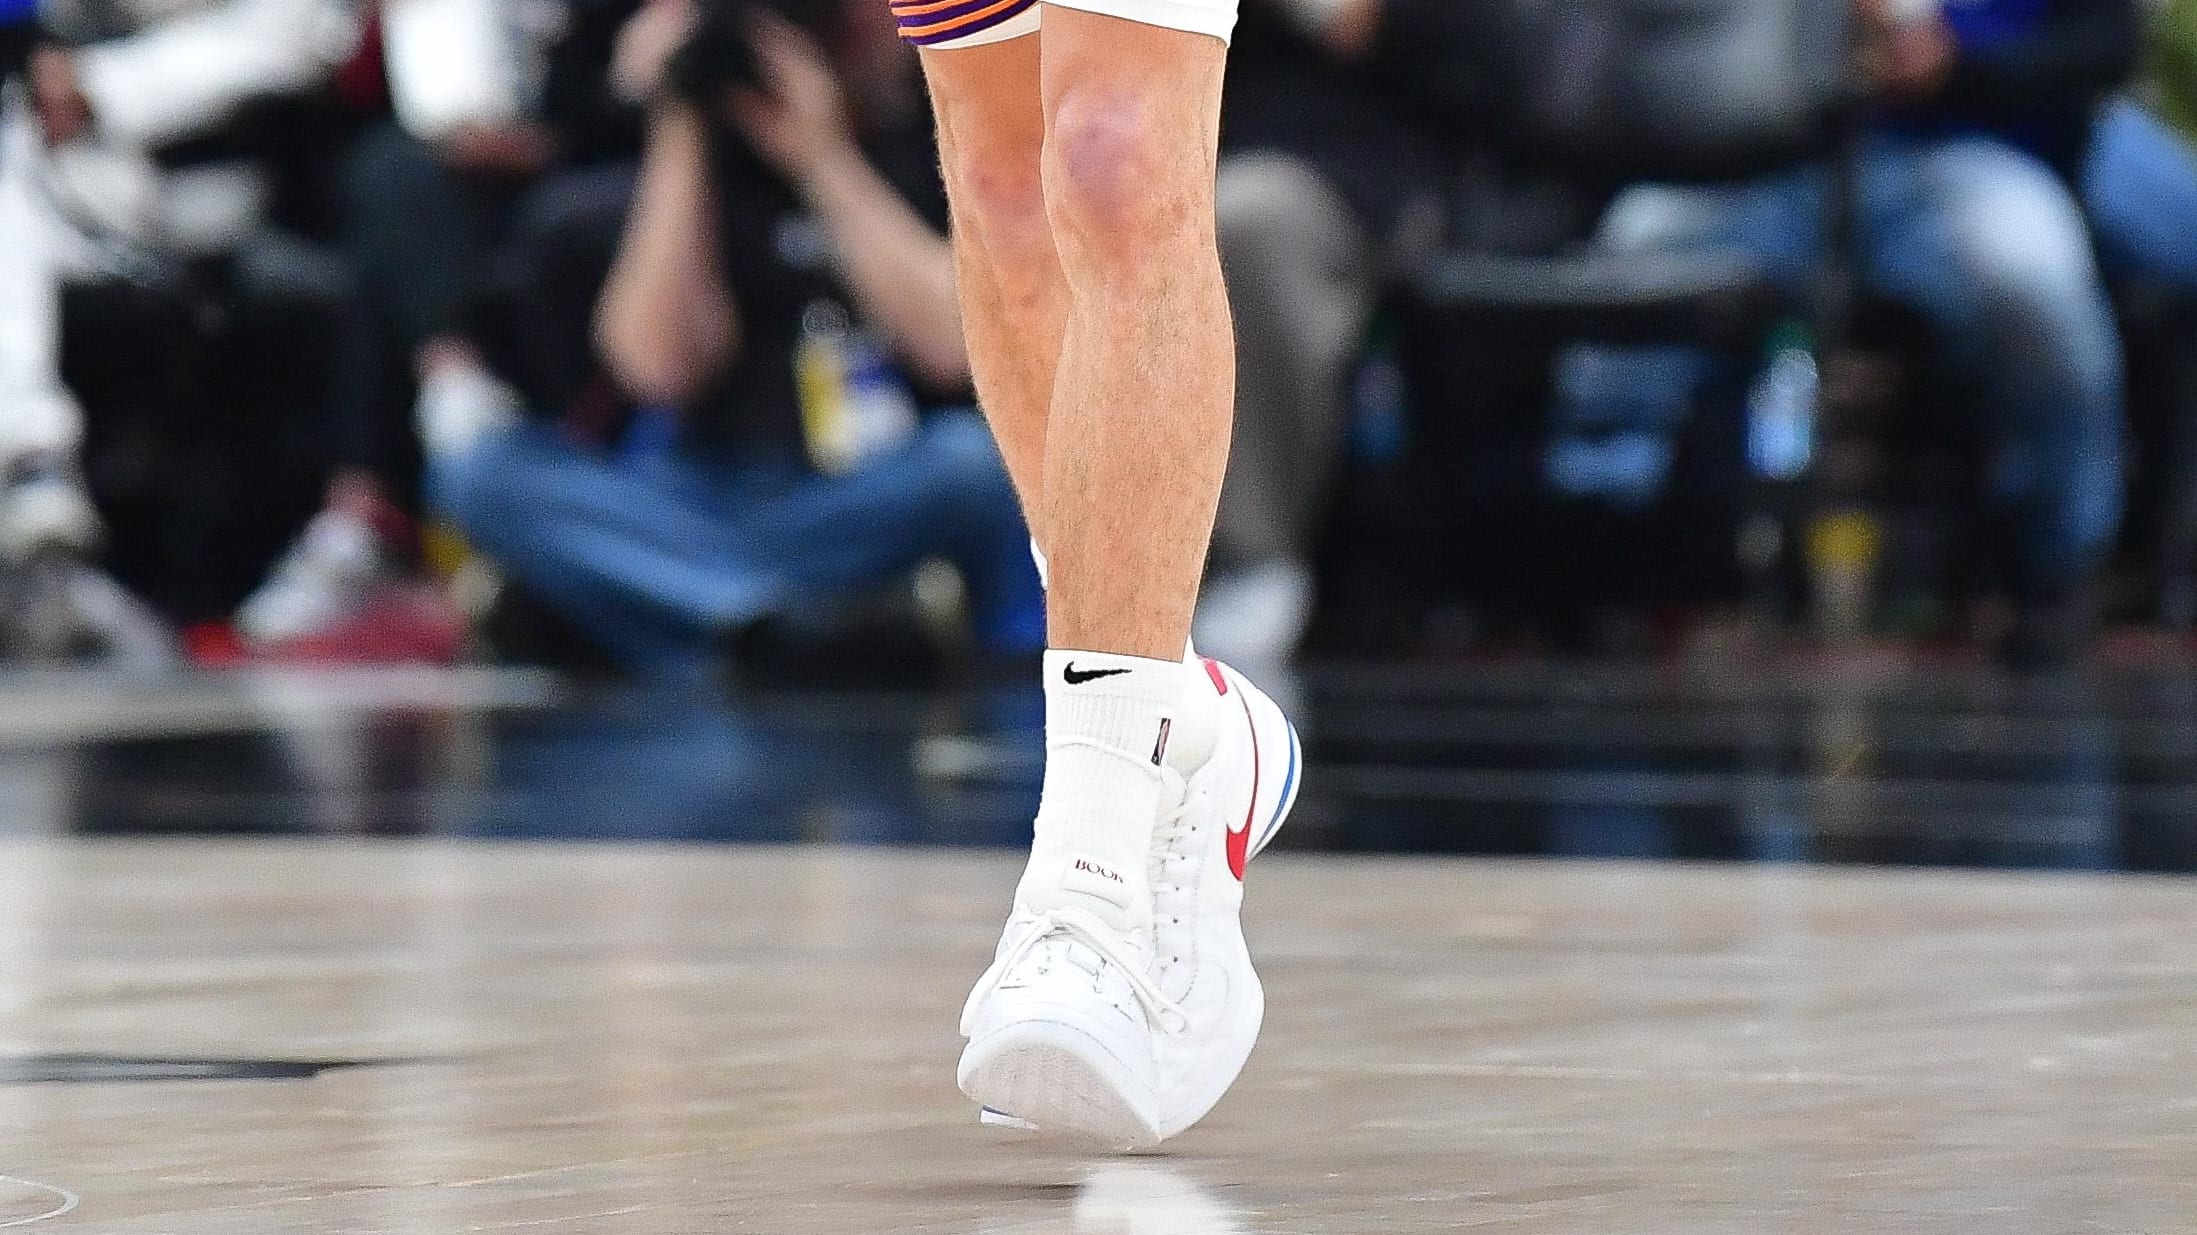 Phoenix Suns guard Devin Booker's white, red, and blue Nike sneakers.